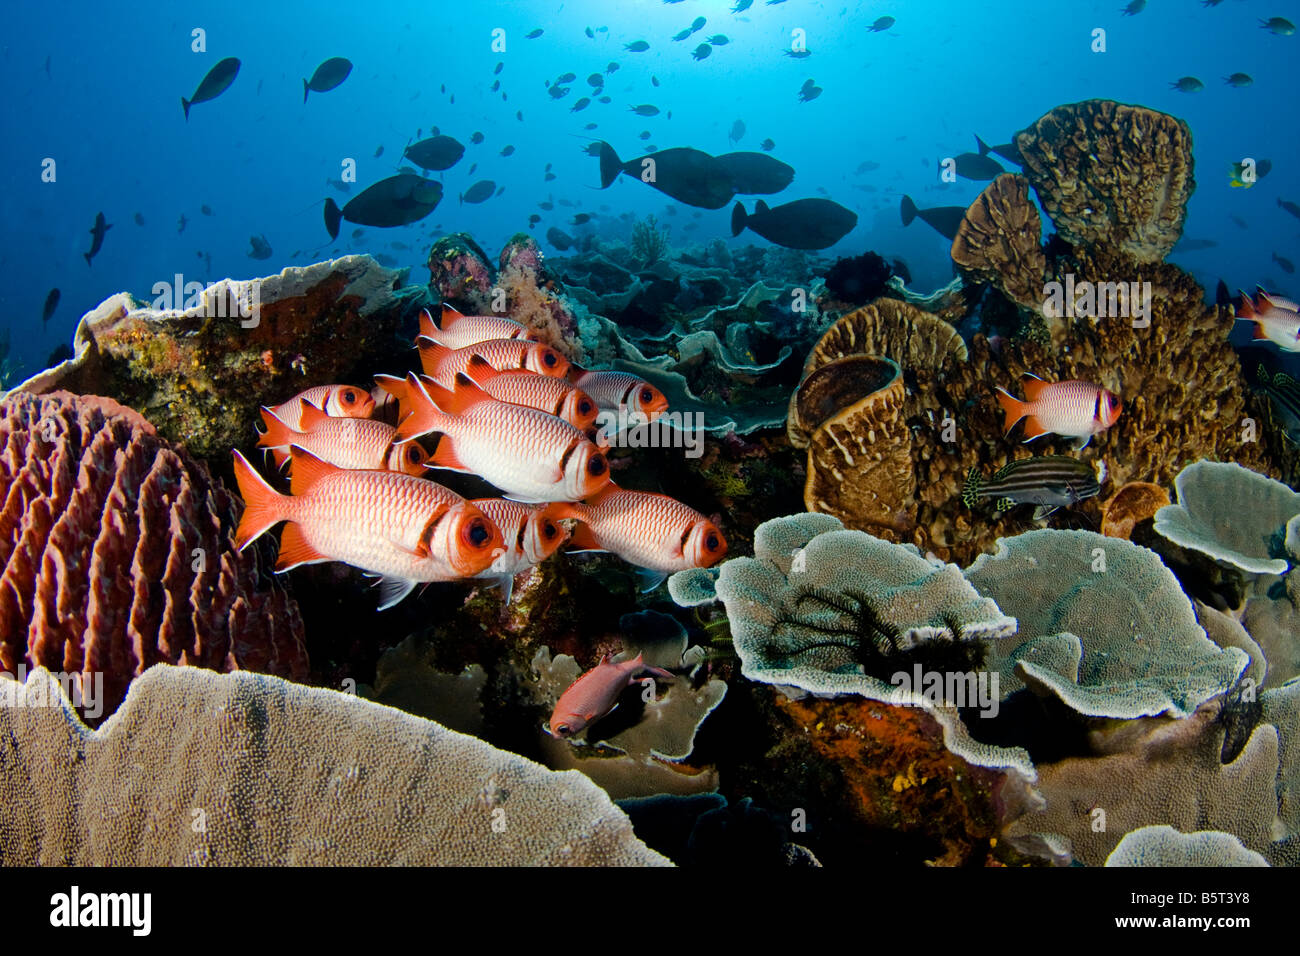 Hard coral, sponge, soldierfish and schooling reef fish, dominate this reef scene, Komodo, Indonesia. Stock Photo